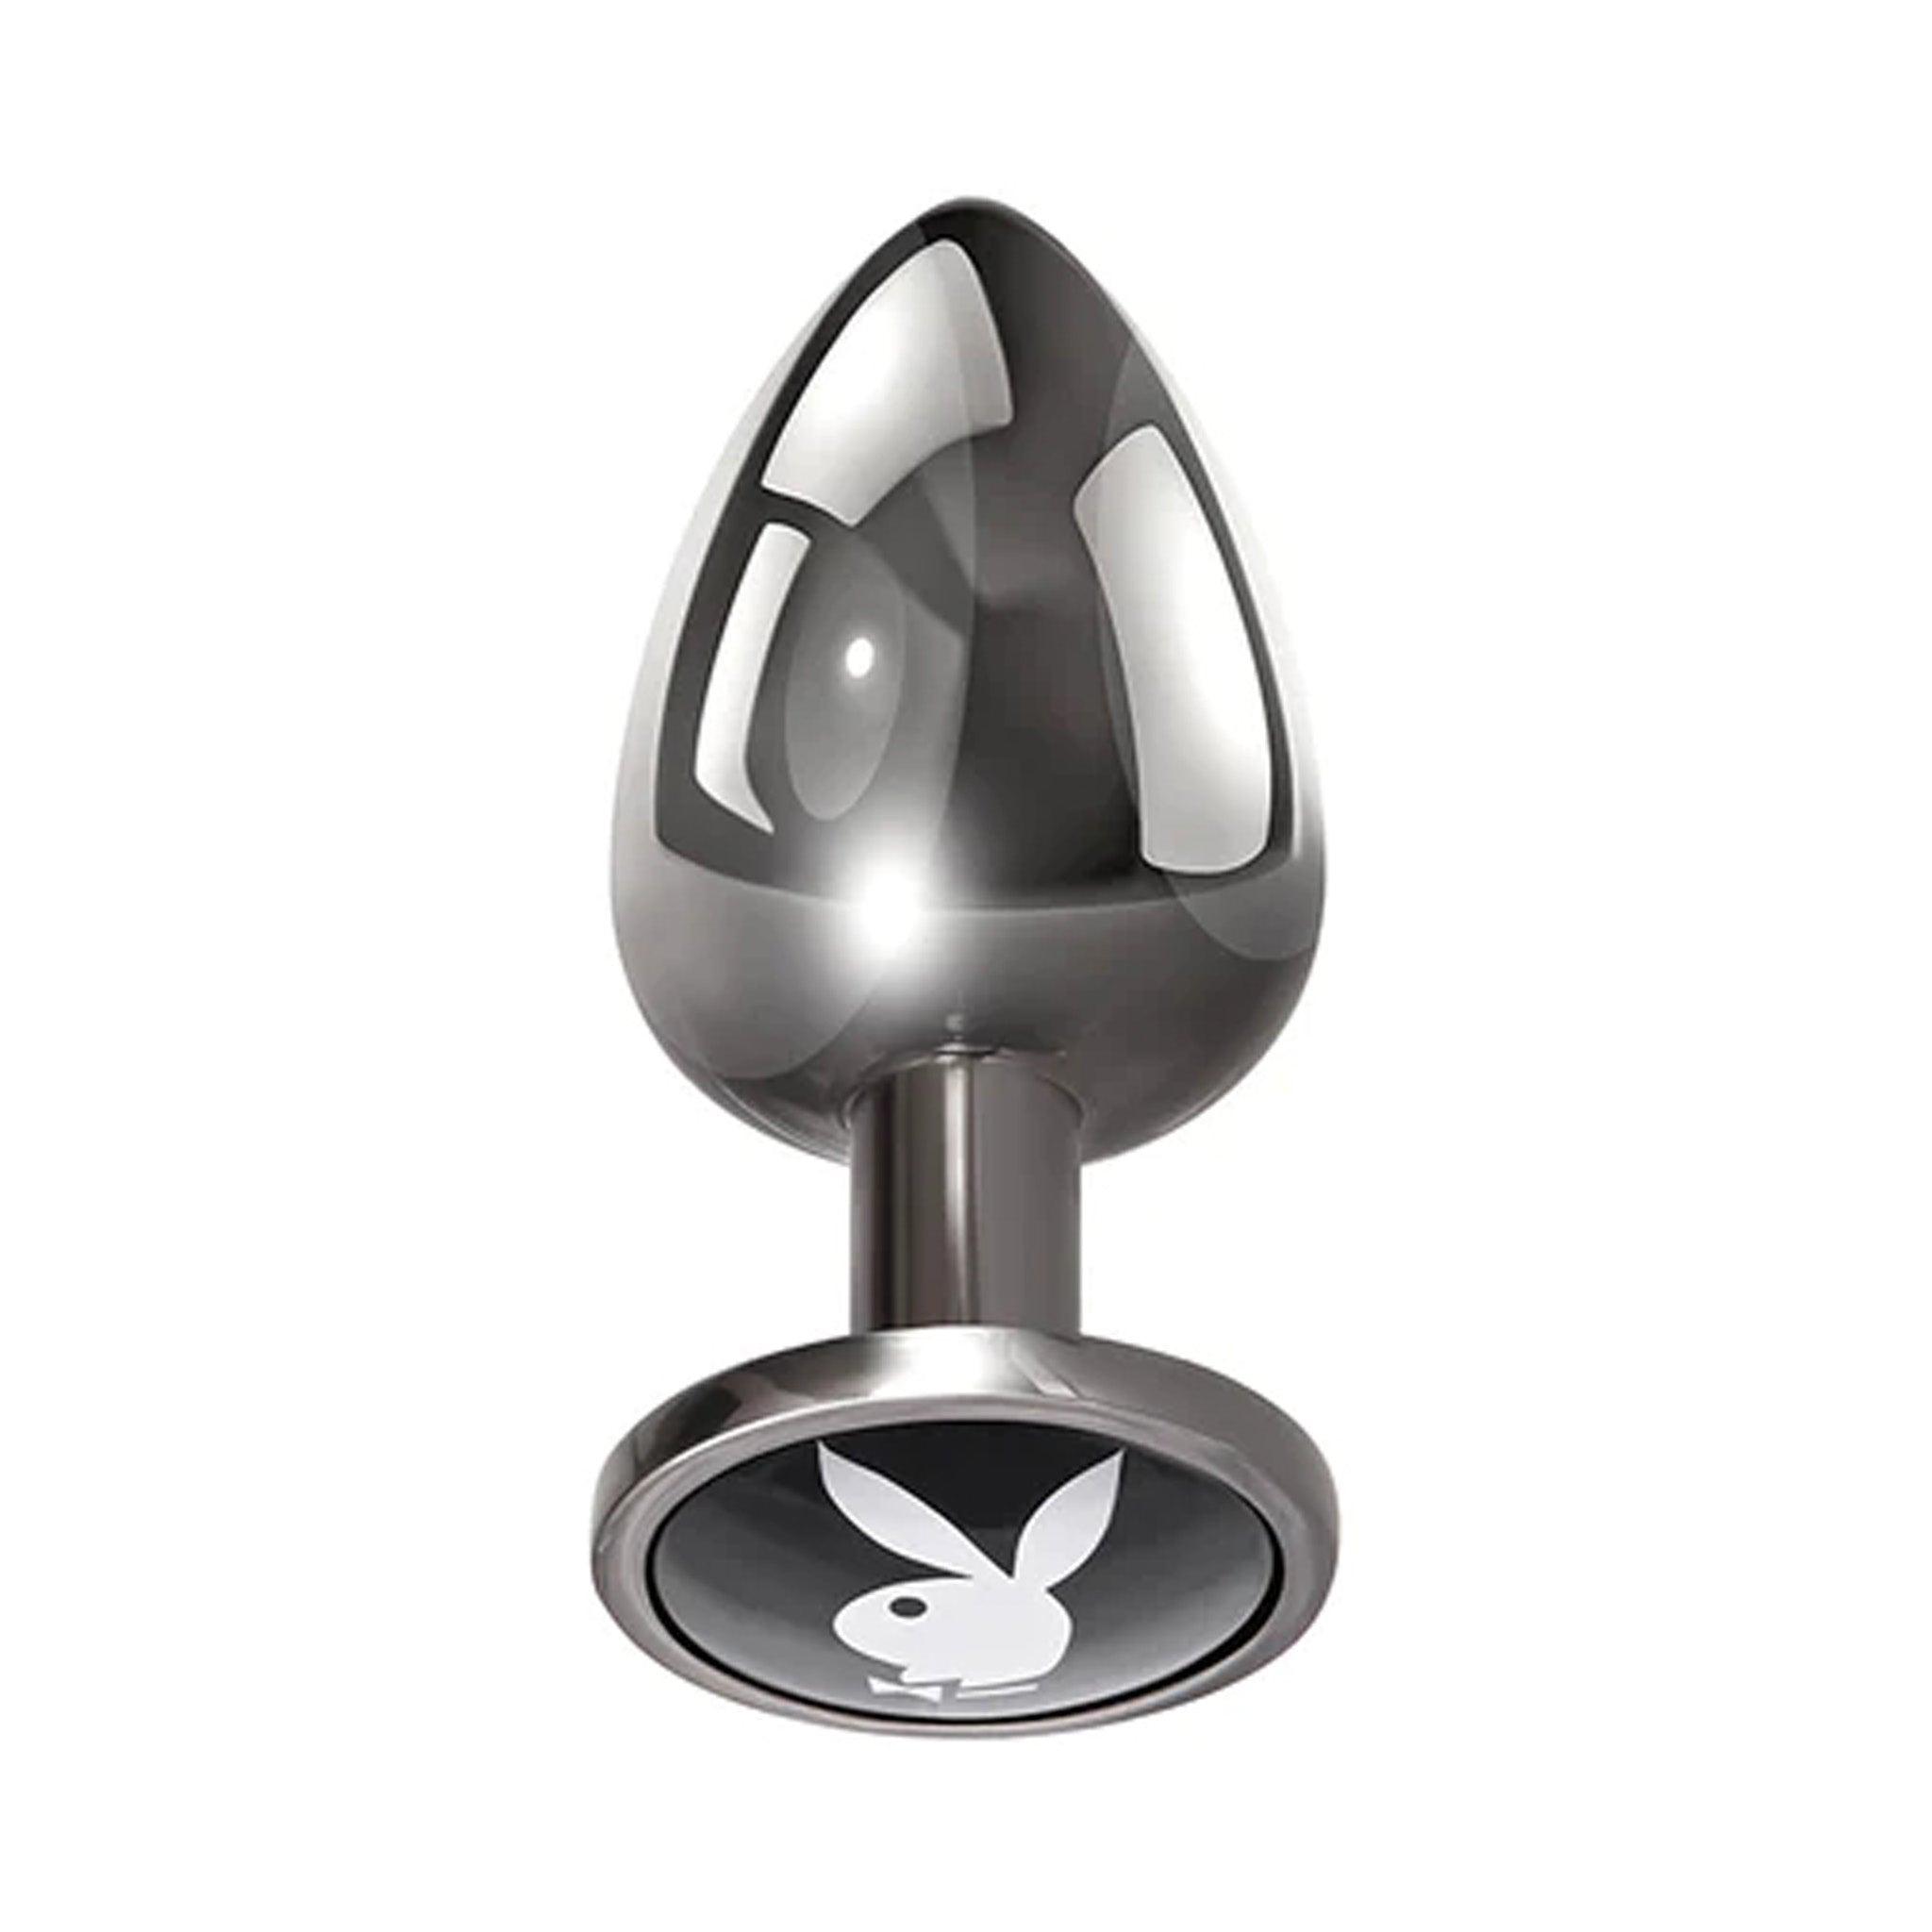 Playboy Tux Metal Anal Plug (2 Sizes Available) - CheapLubes.com